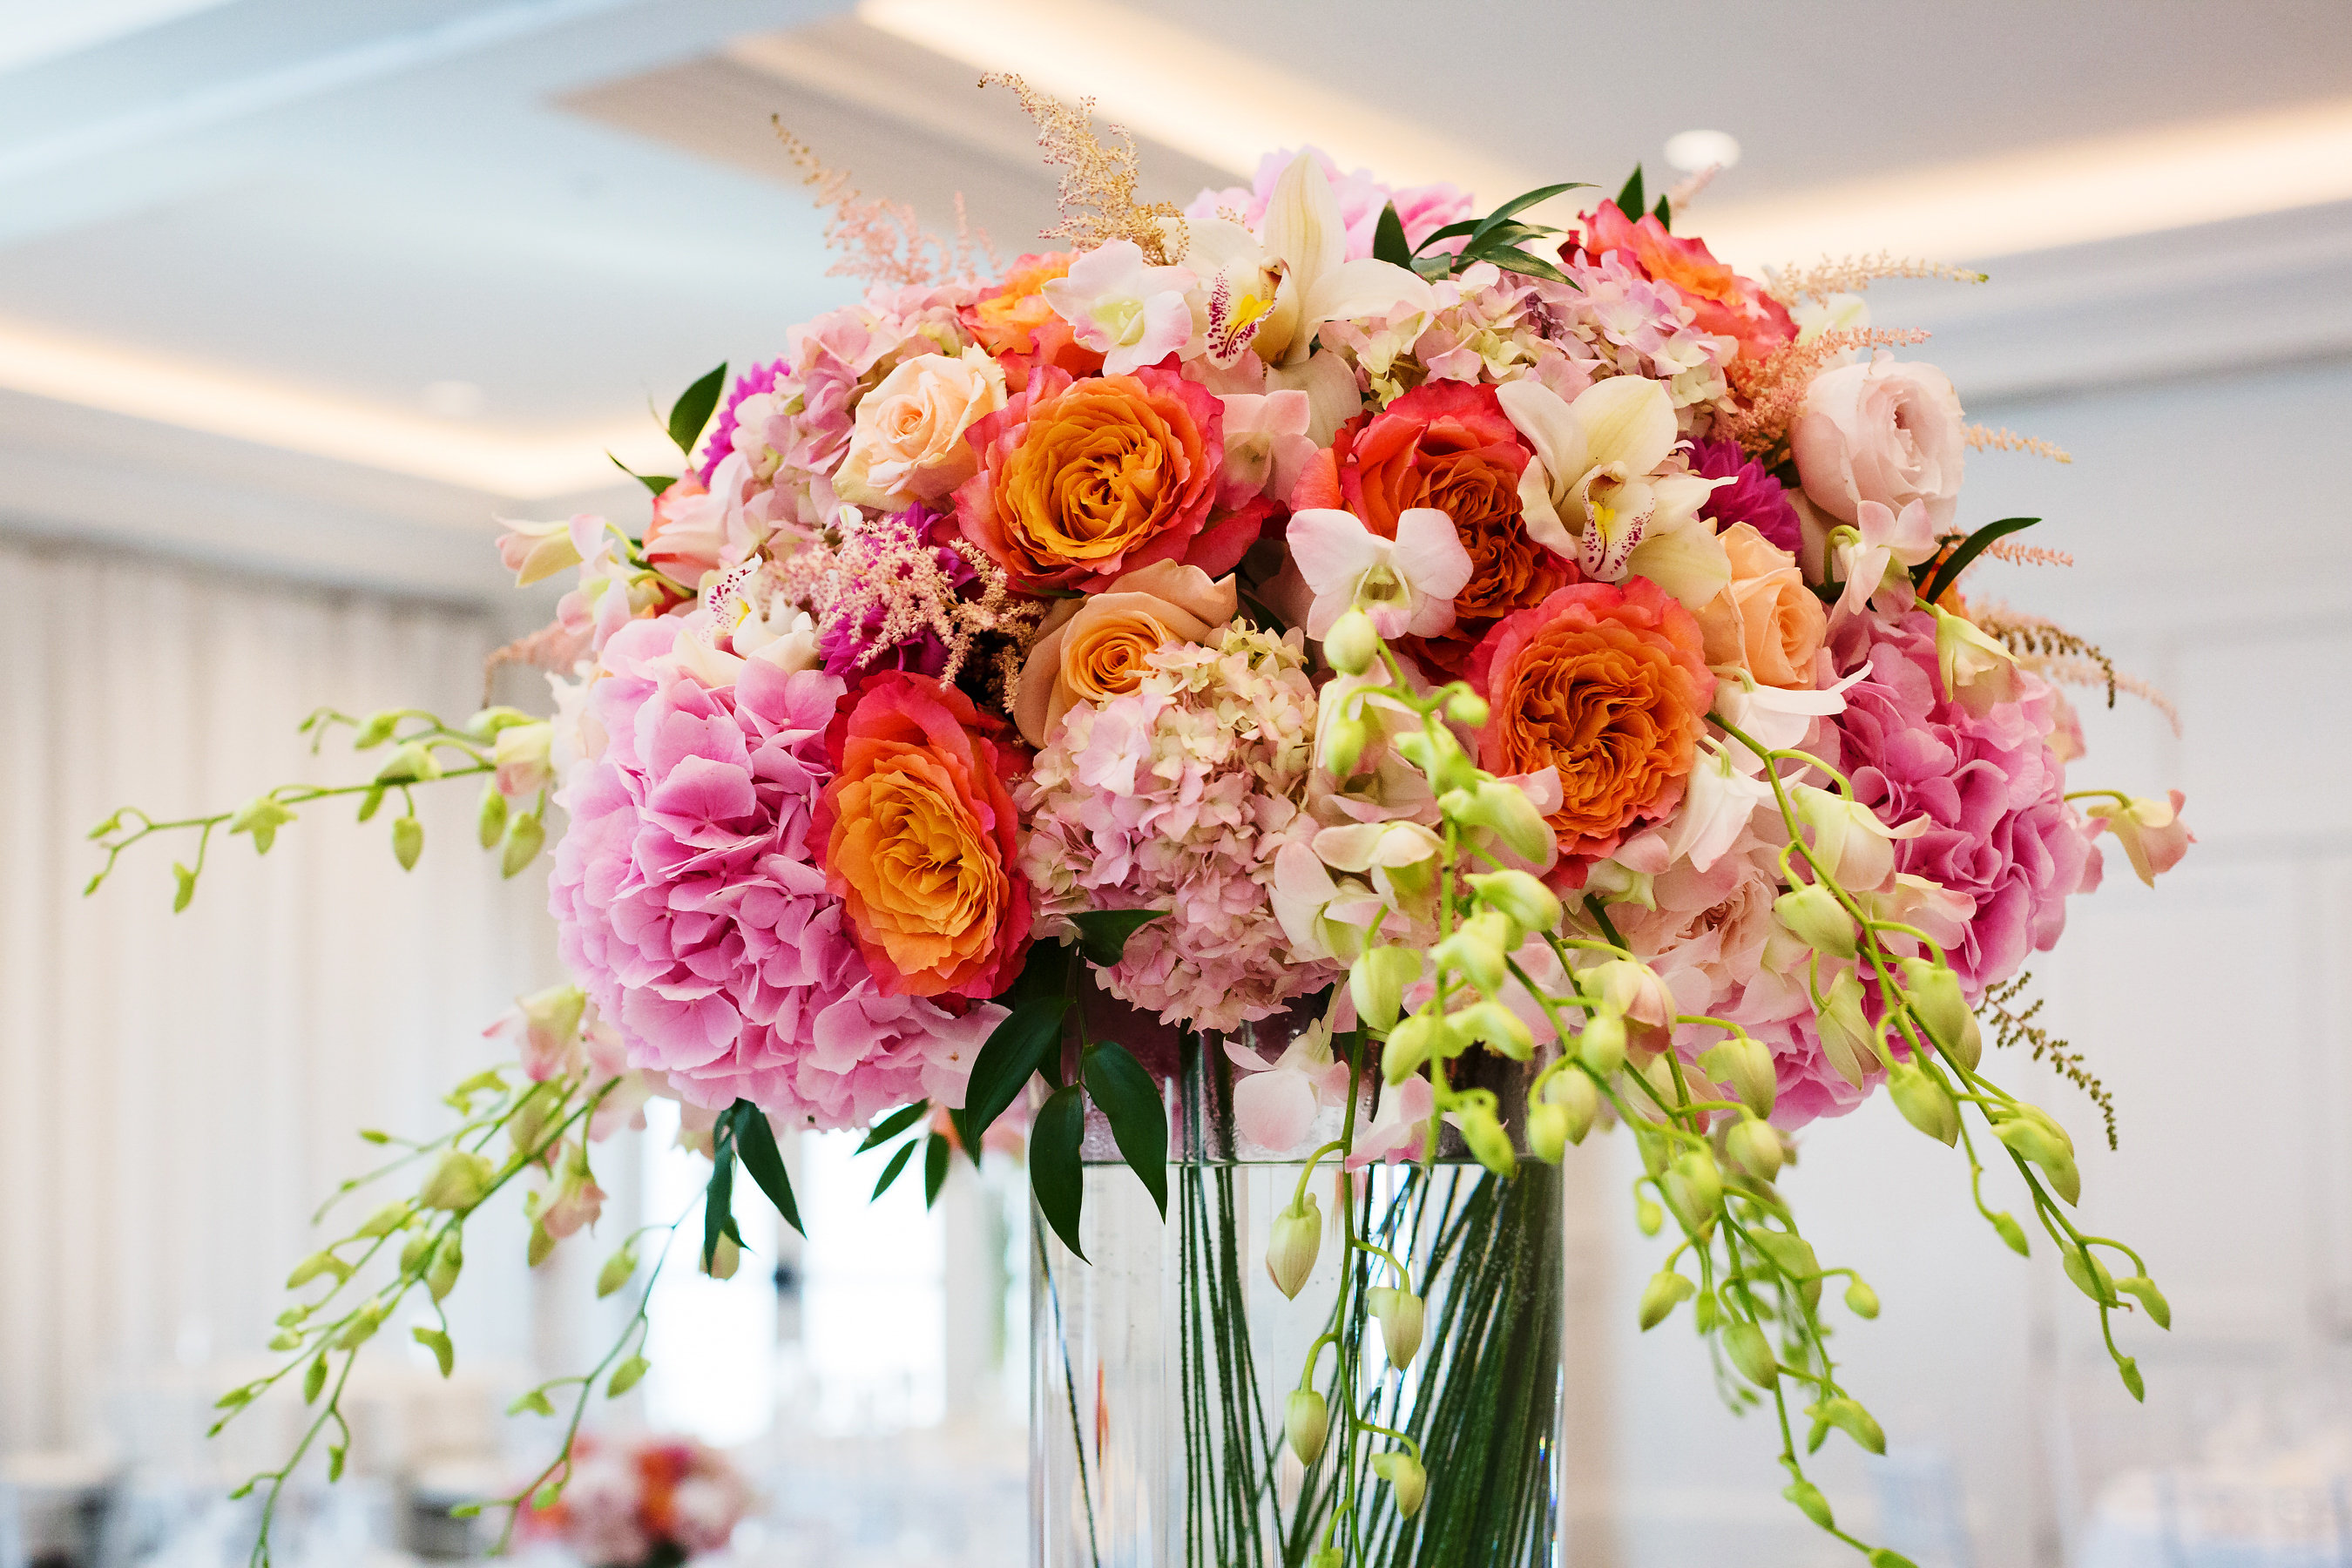 Tall wedding centerpieces with summer colors by Stapleton Floral Design